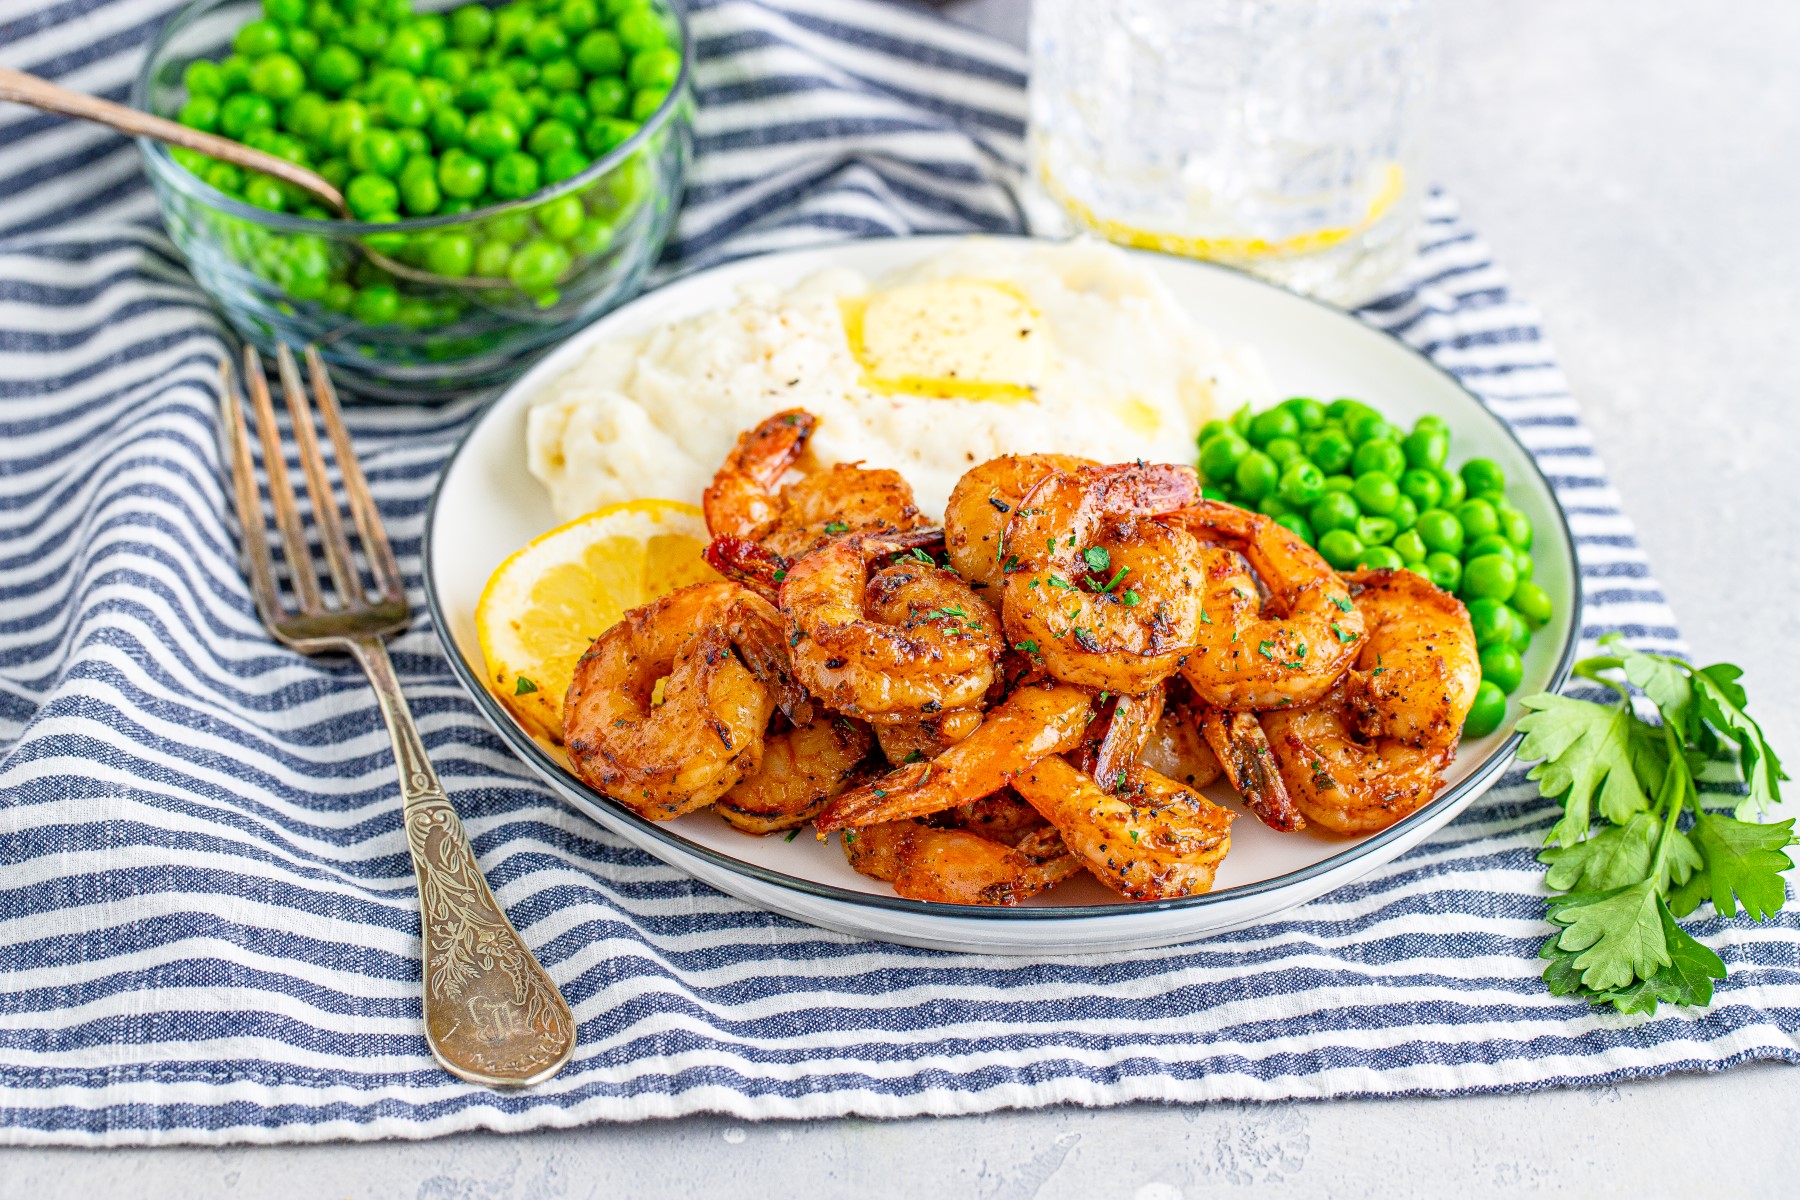 Blackened shrimp on a white dinner plate with peas, and mashed potatoes on a blue and white striped place mat.